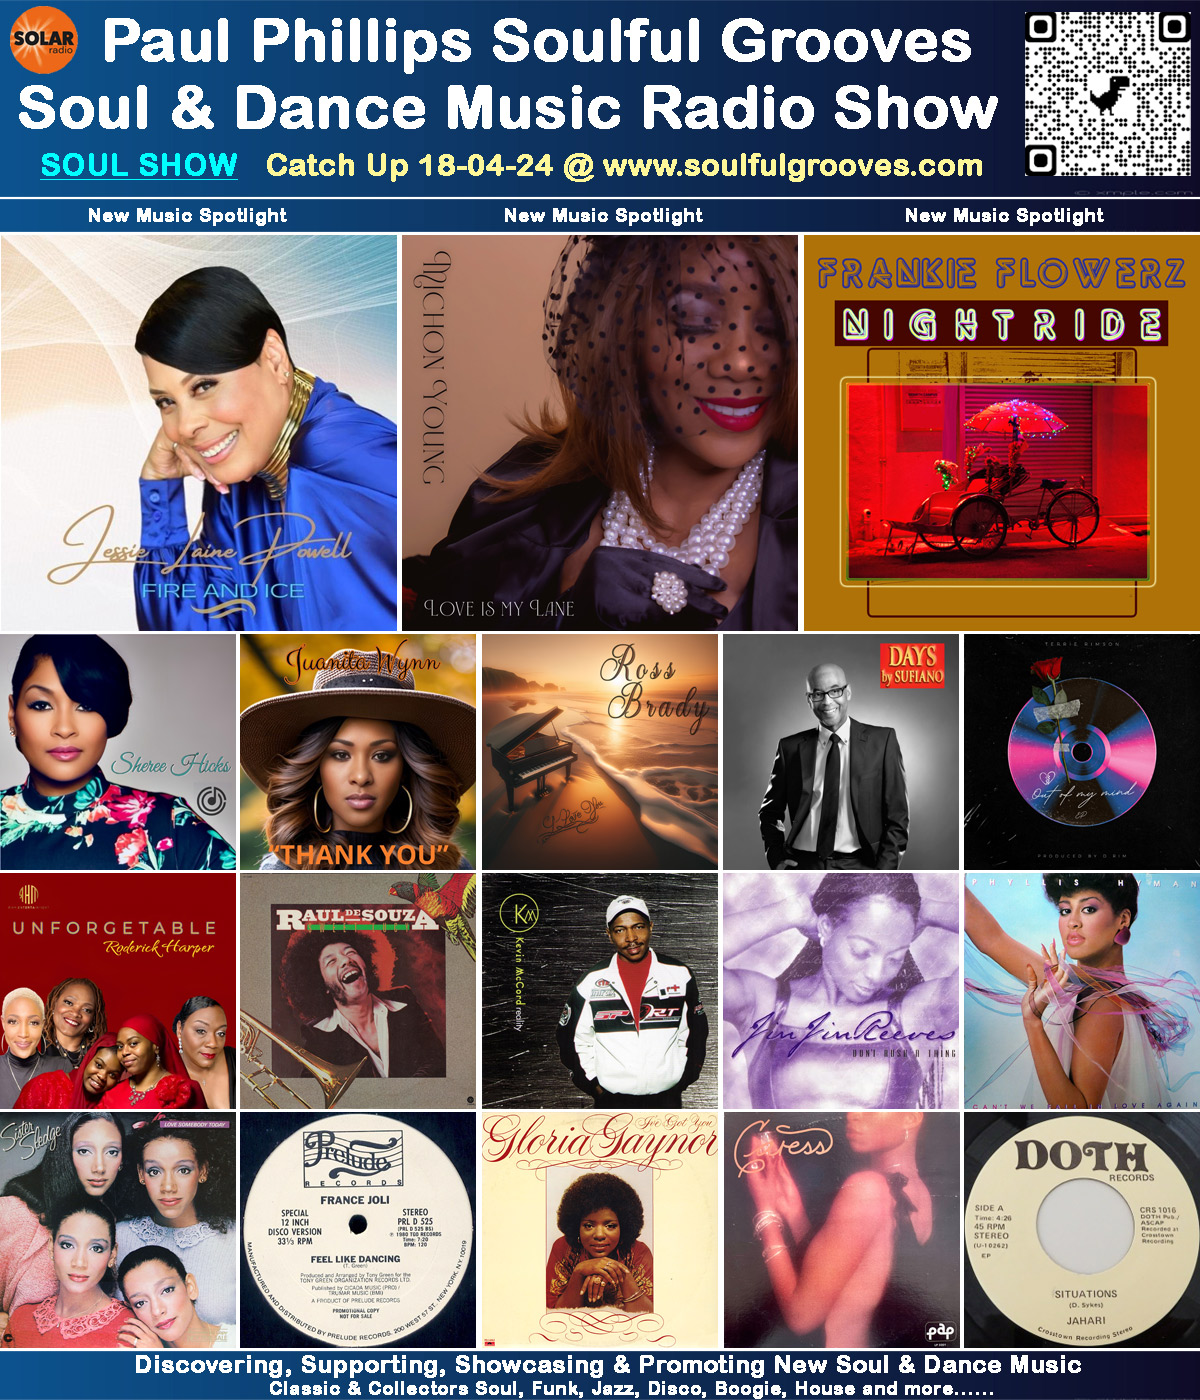 Paul Phillips Soulful Grooves Solar Radio Soul Music Show Playlist playing soul, funk, jazz, disco, boogie, neo soul